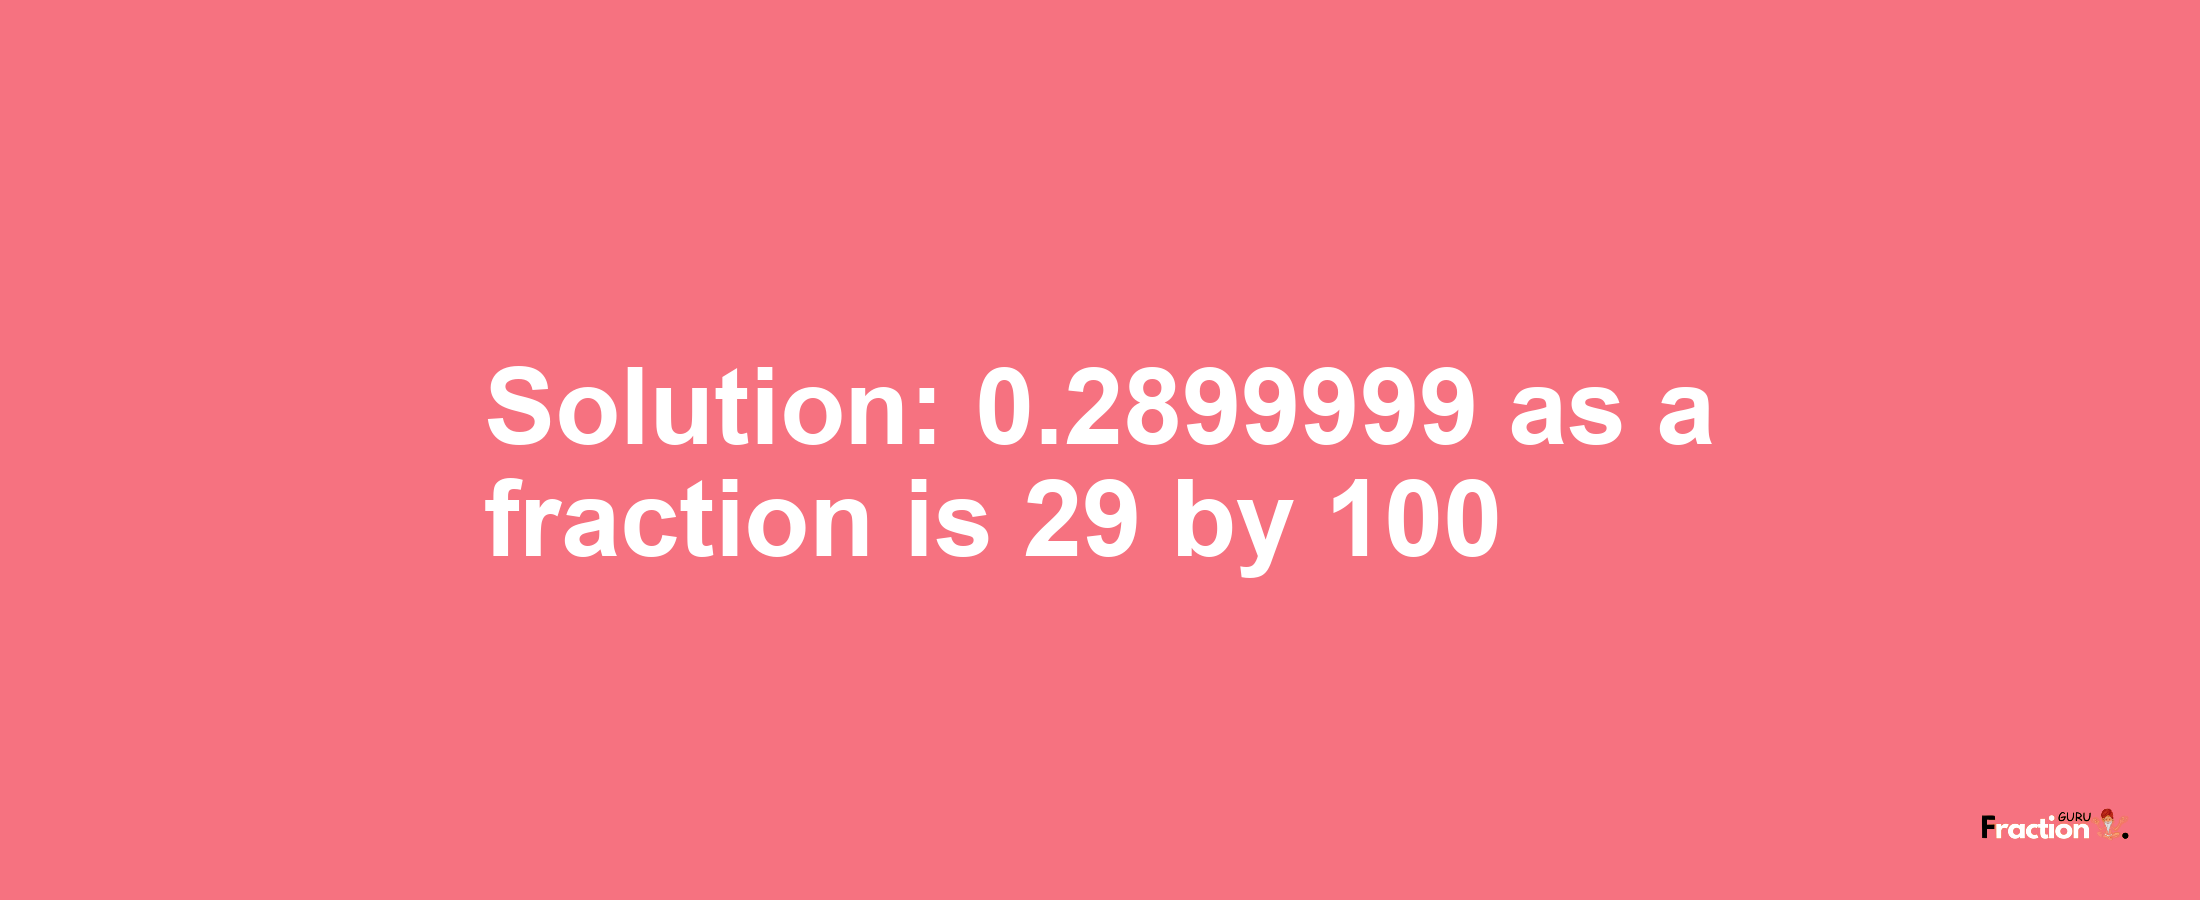 Solution:0.2899999 as a fraction is 29/100